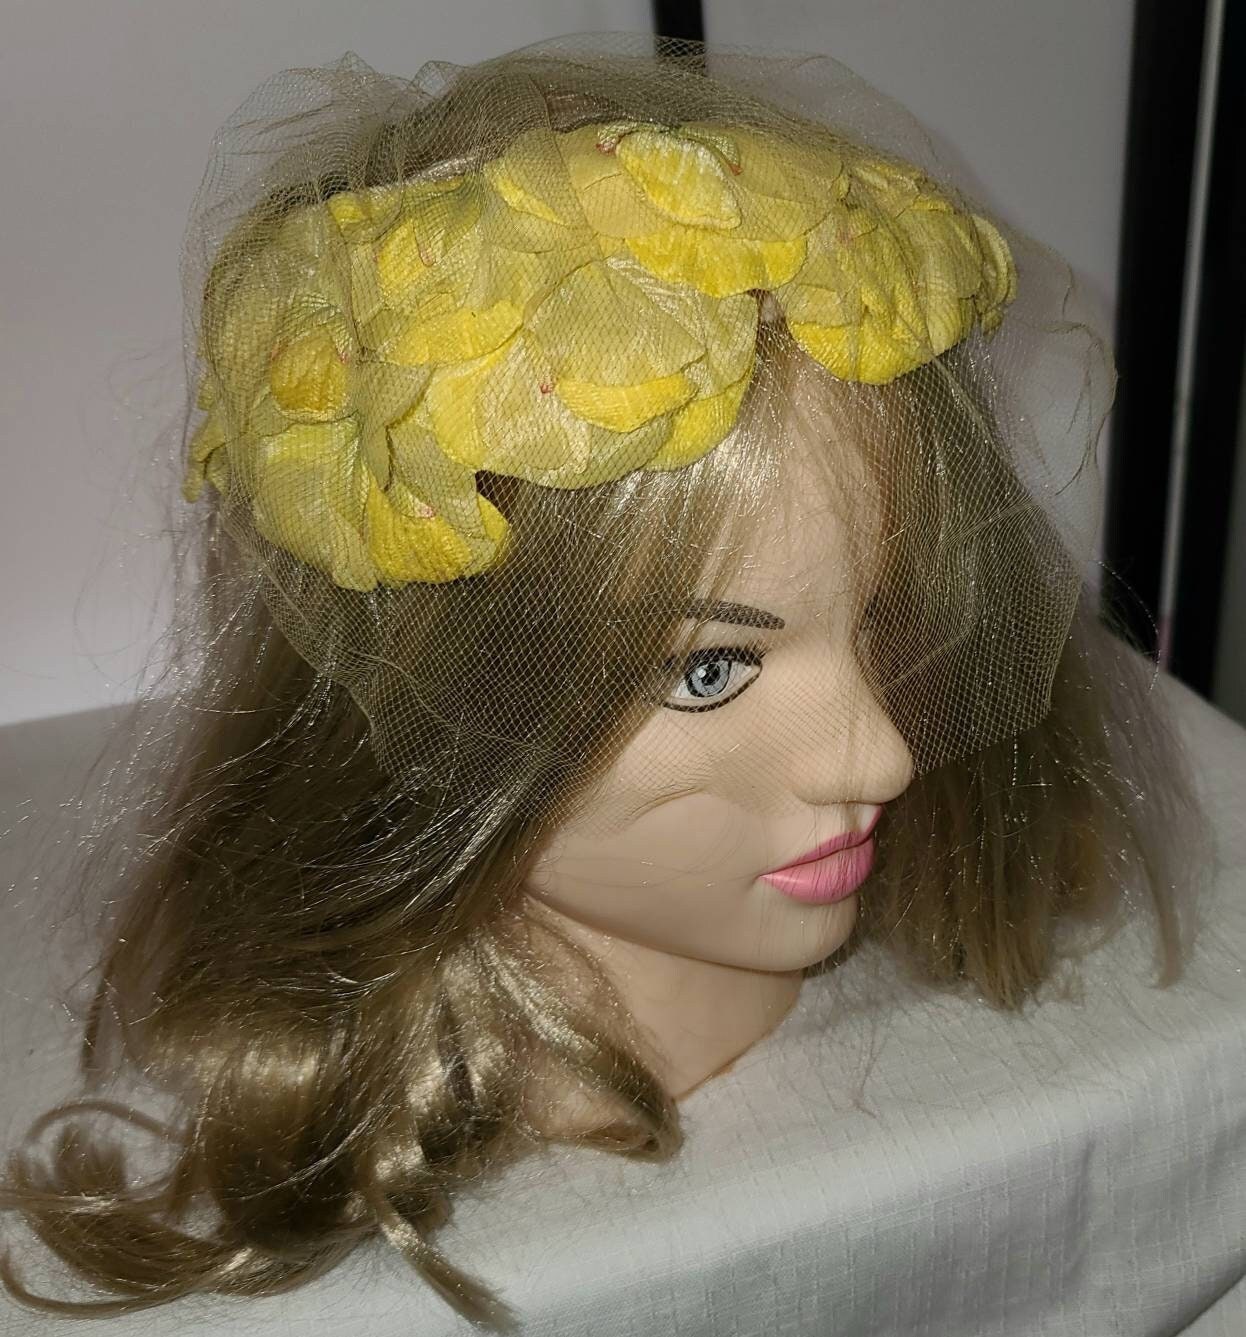 SALE Vintage Floral Hat 1950s Bright Yellow Floral Open Ring Hat Fine Net Veil Rockabilly Pinup Wedding